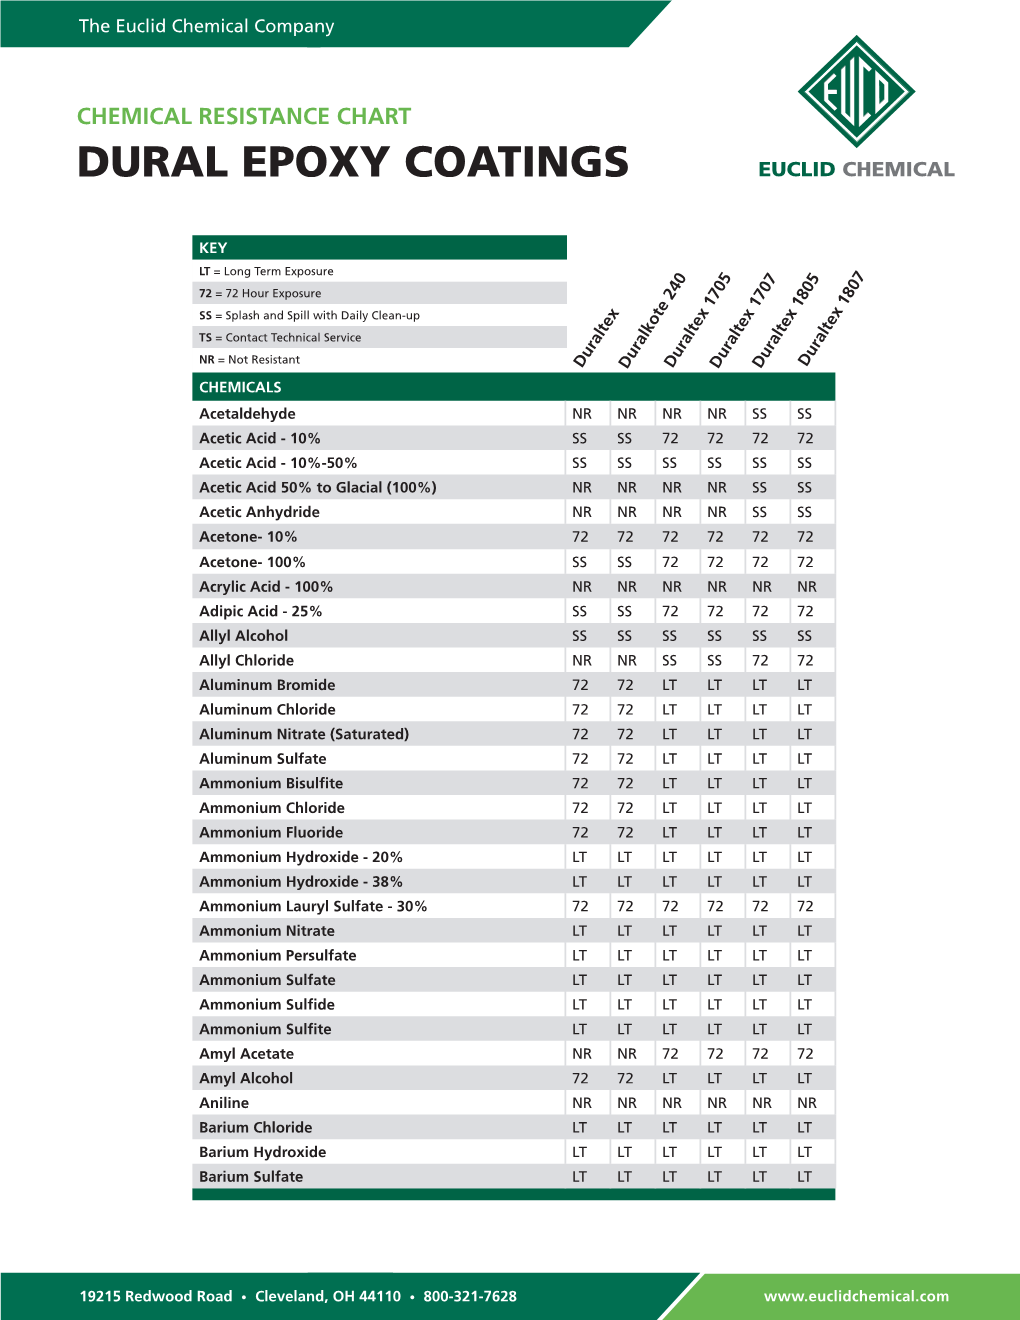 Dural Epoxy Coatings Chemical Resistance Chart